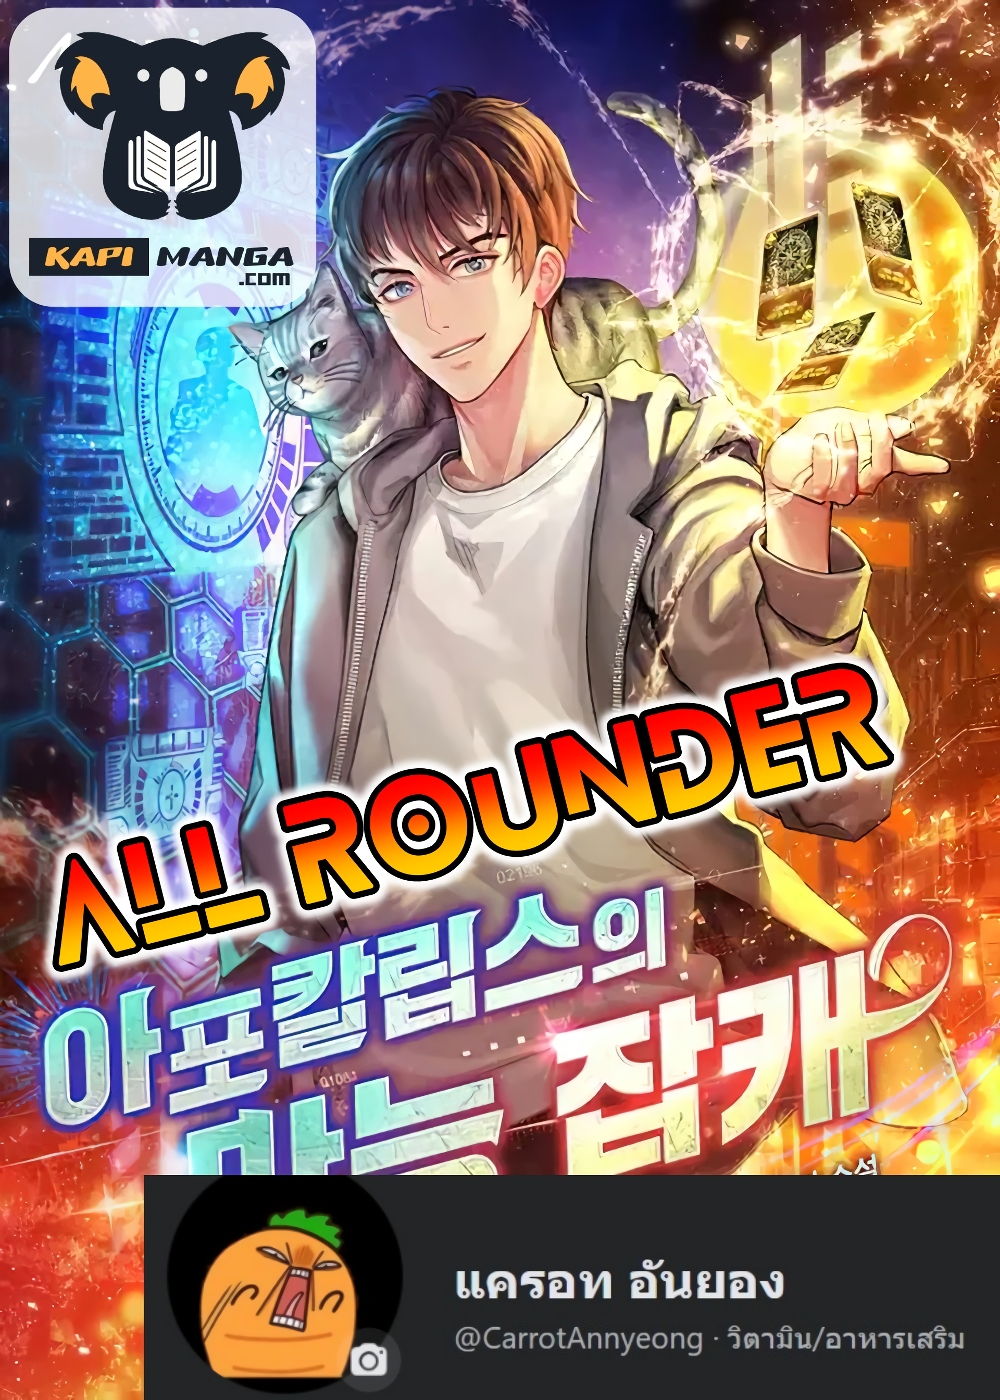 All Rounder 9 (1)